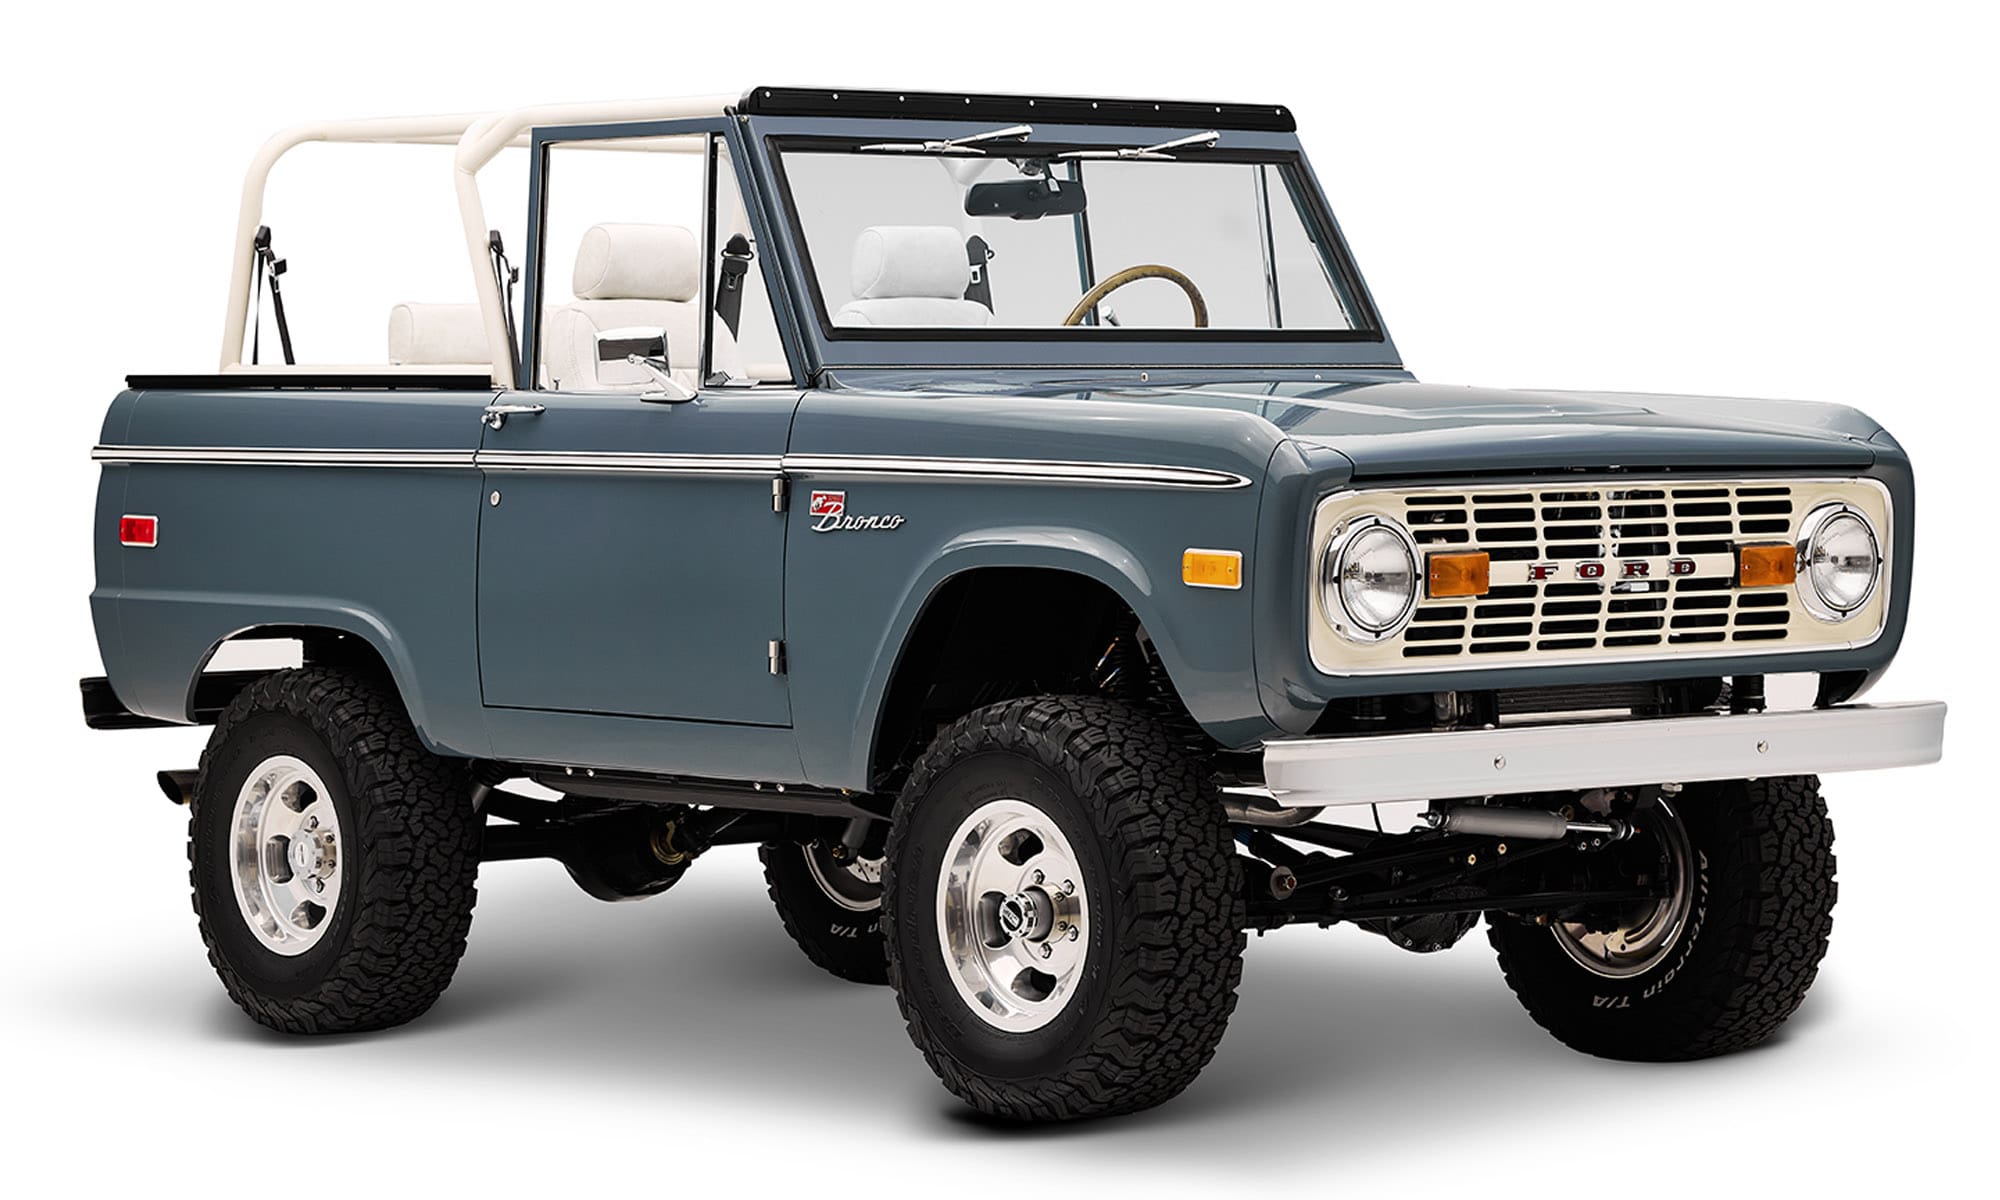 1966 Classic Ford Bronco 302 Series in Atlas Gray with White Rock leather interior and white roll cage